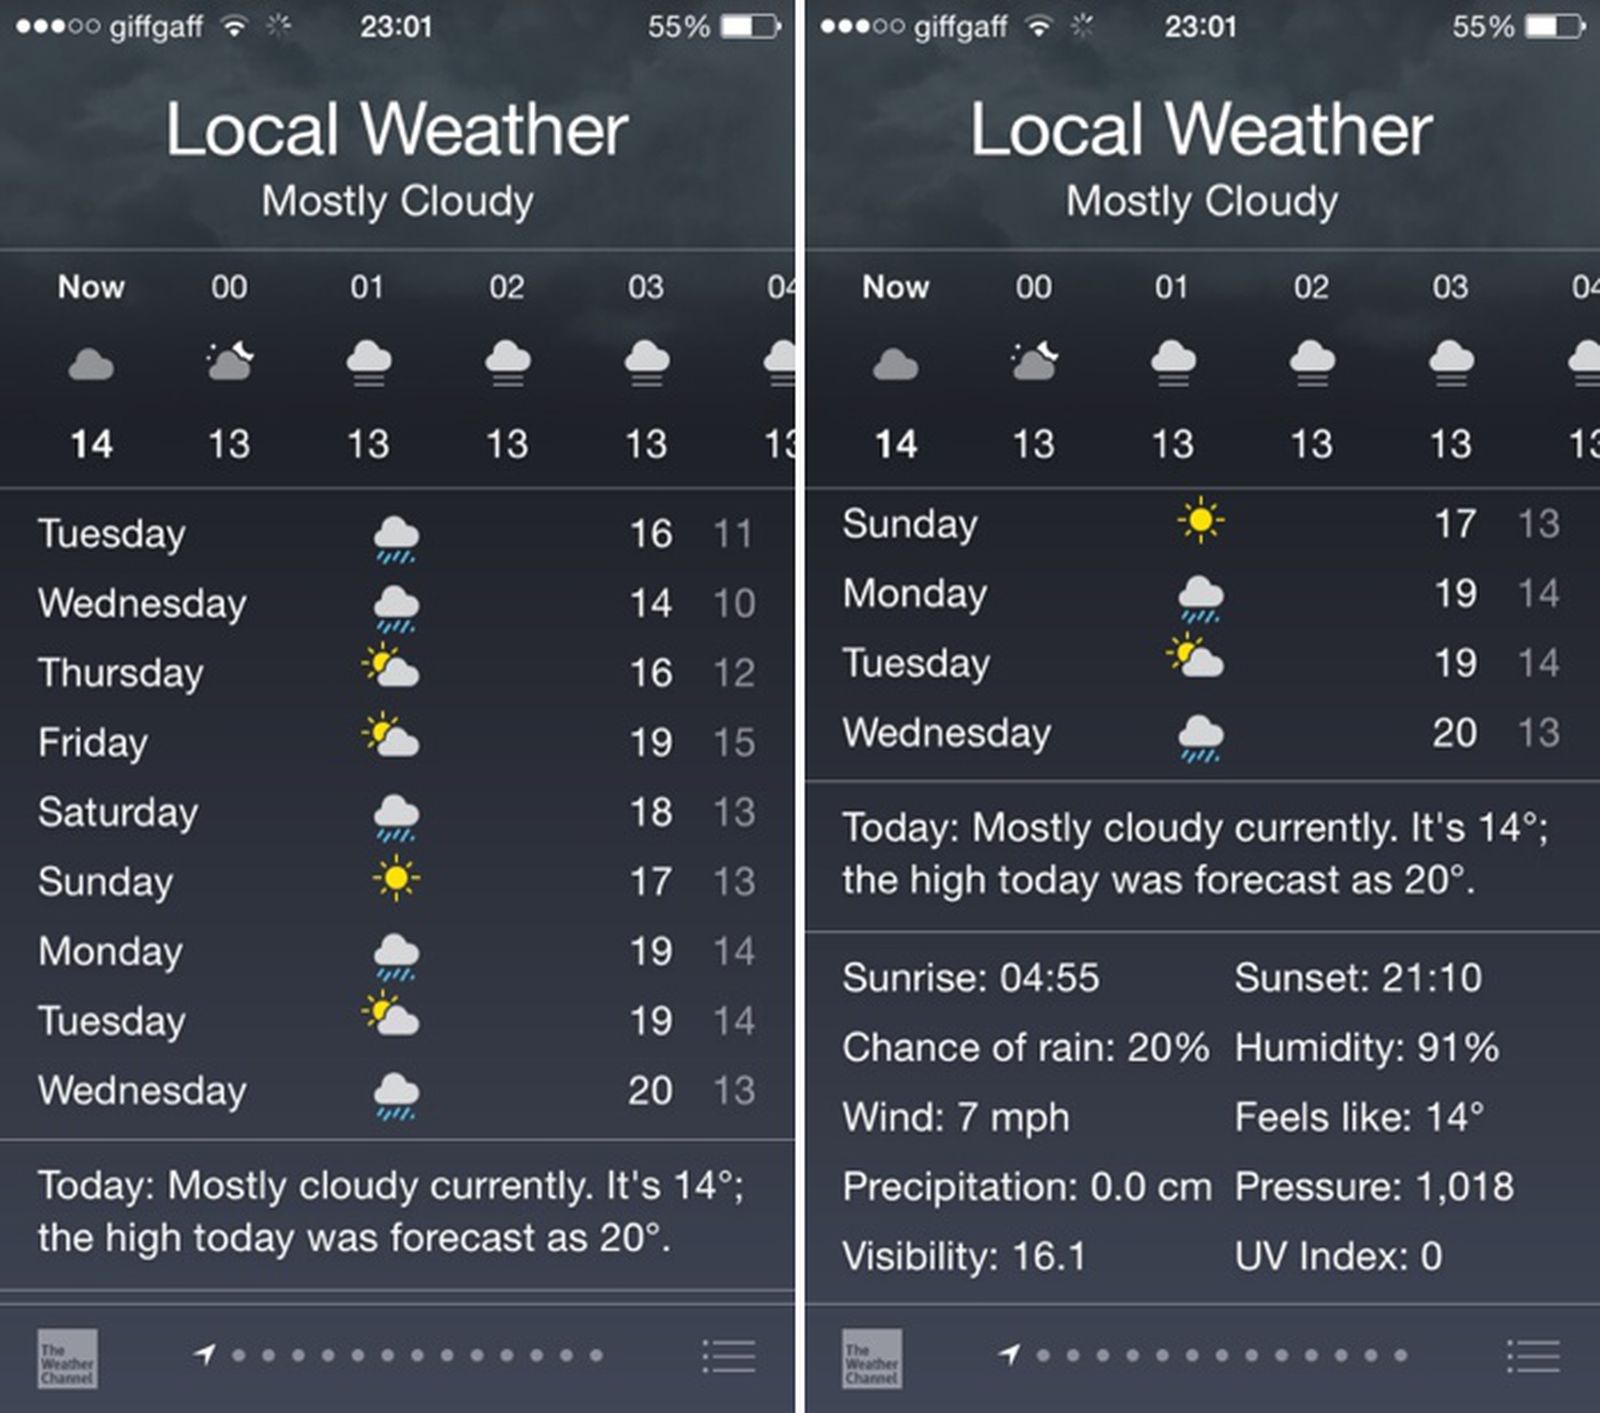 iOS 8 Ditches Yahoo Weather for Content From The Weather Channel - MacRumors